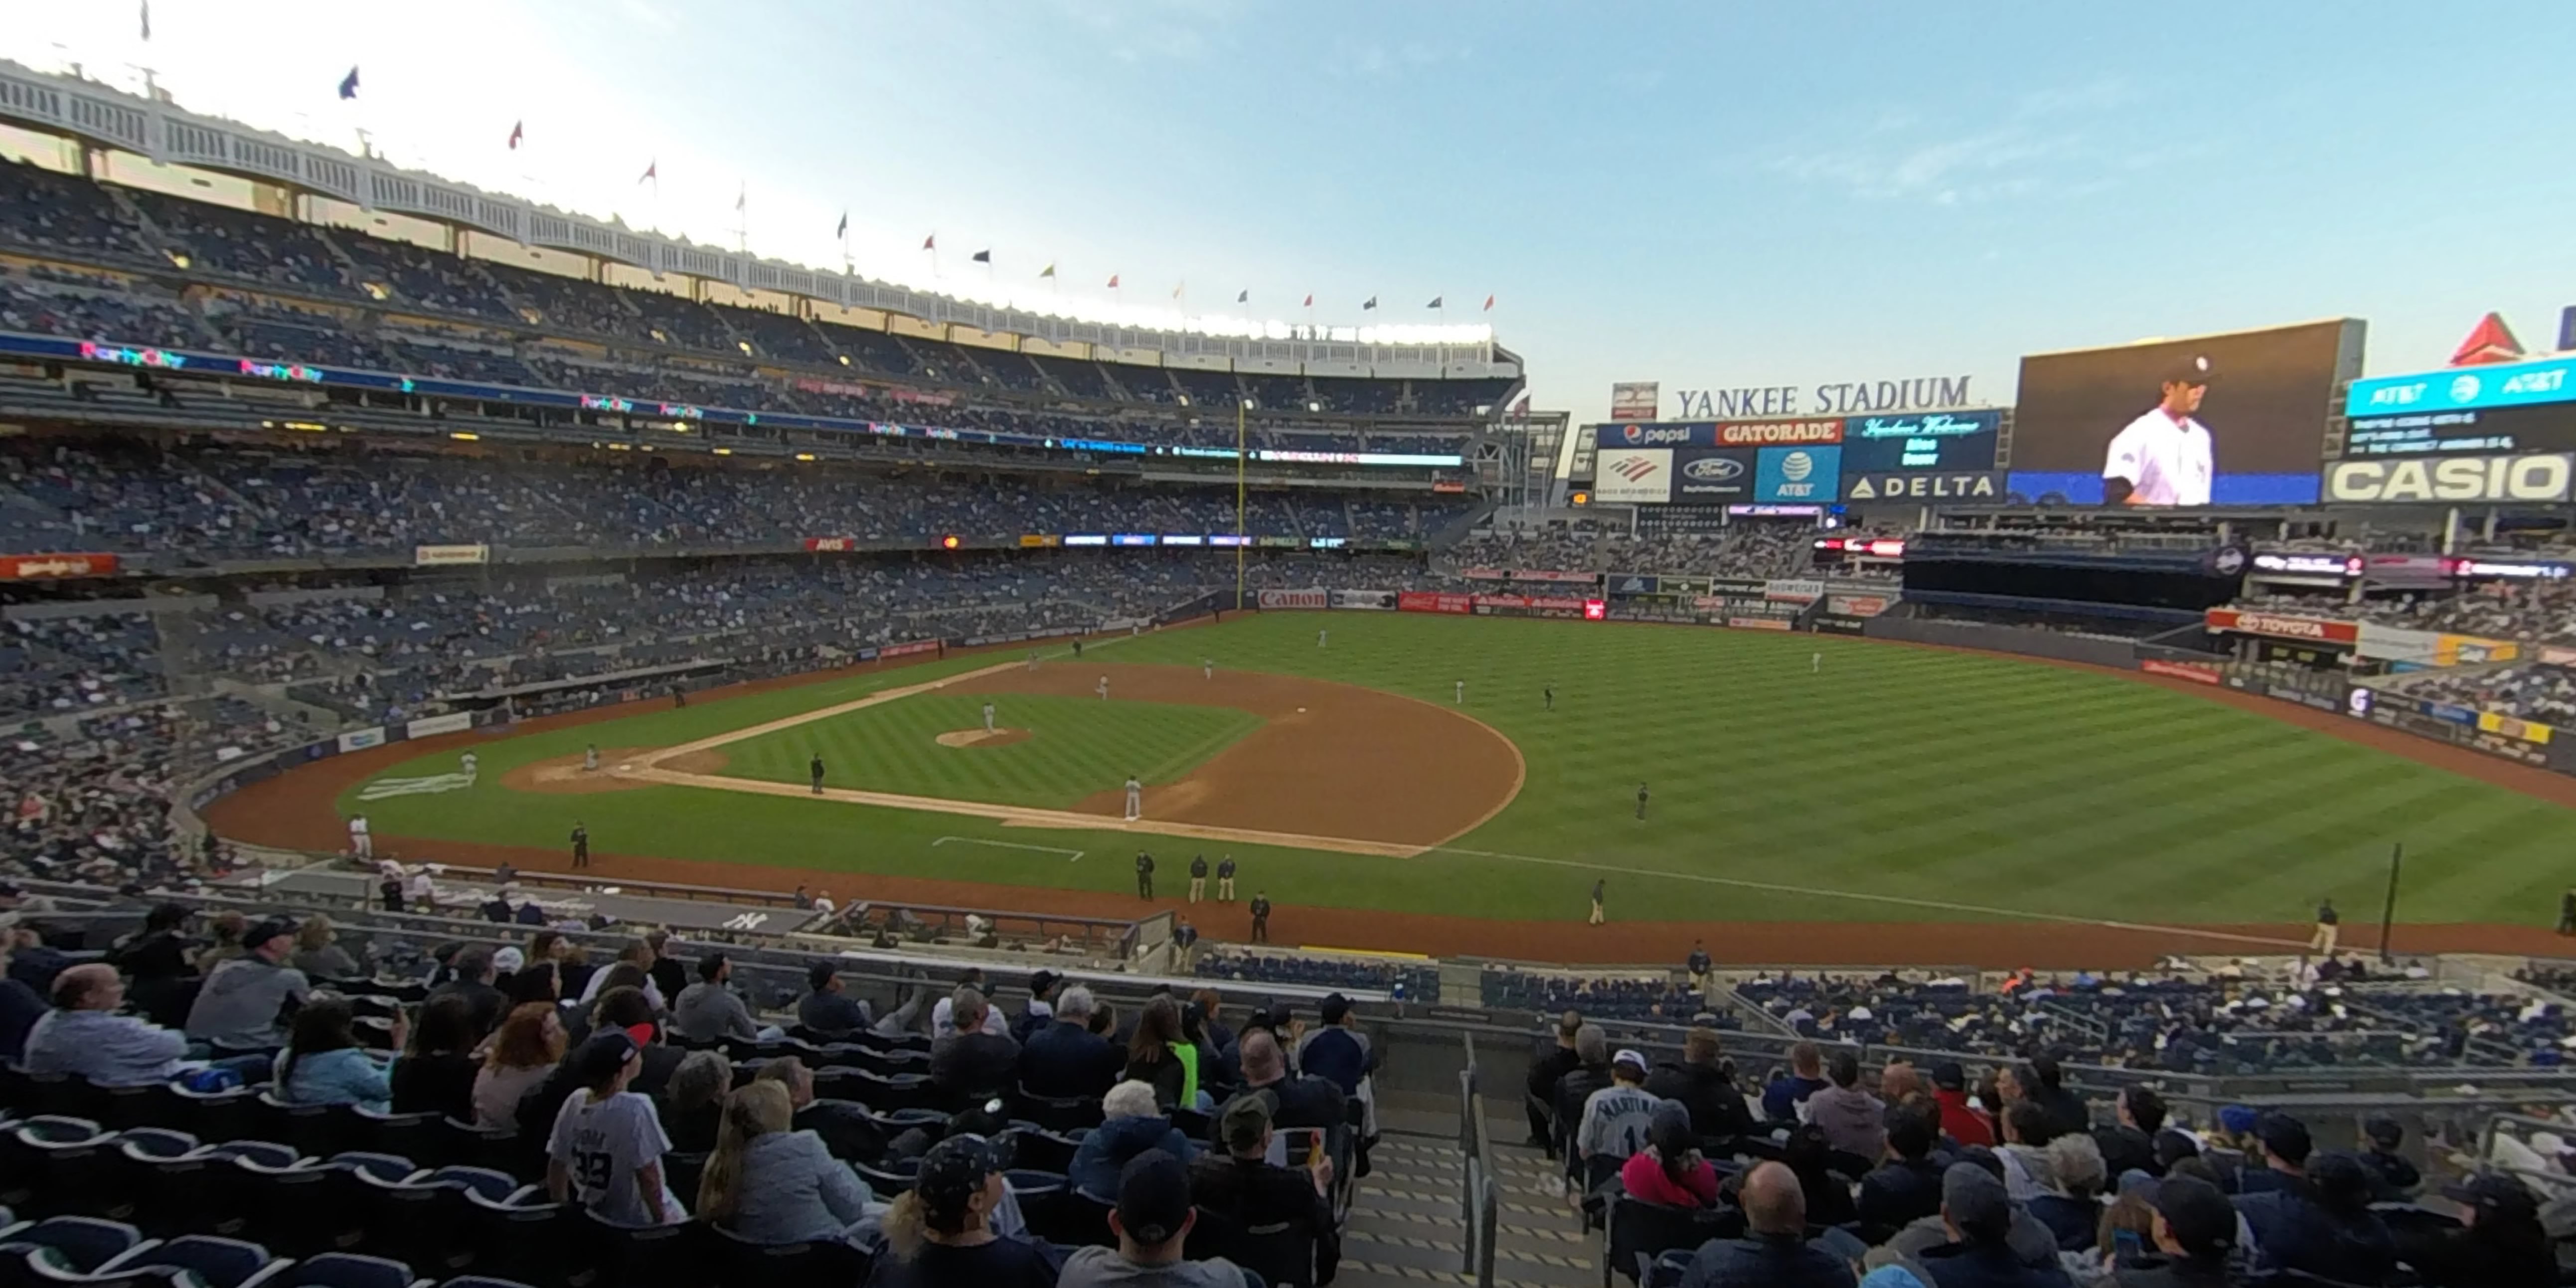 section 214a panoramic seat view  for baseball - yankee stadium